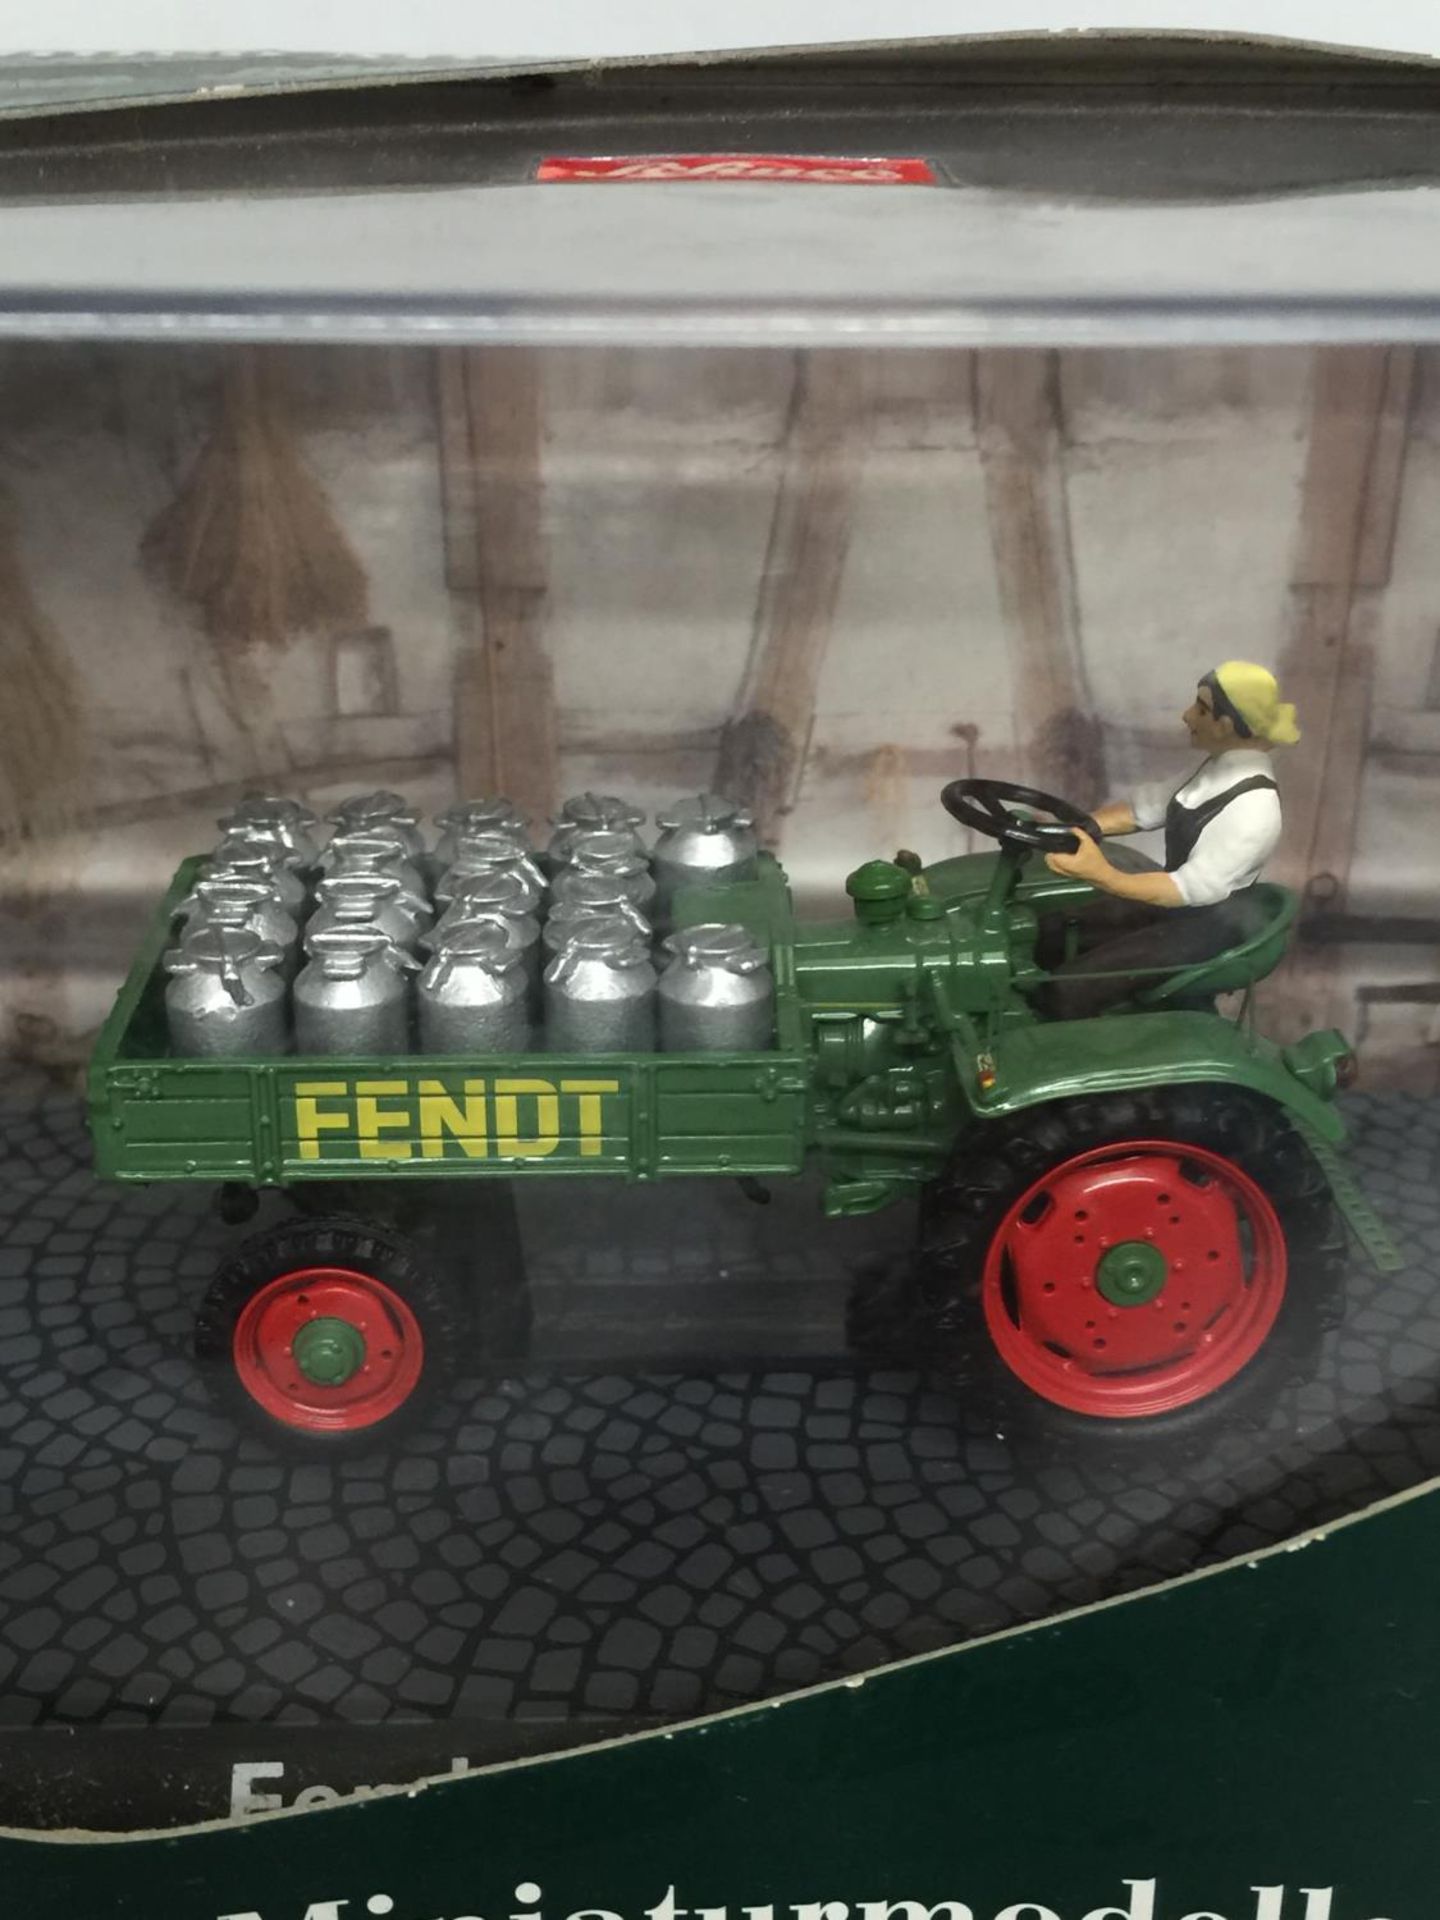 TWO BOXED FARM MODELS, A SCHUCO FENDT TRACTOR, 1/43 SCALE AND A SIKU DEUTZ BALER, 1/32 SCALE - Image 2 of 5